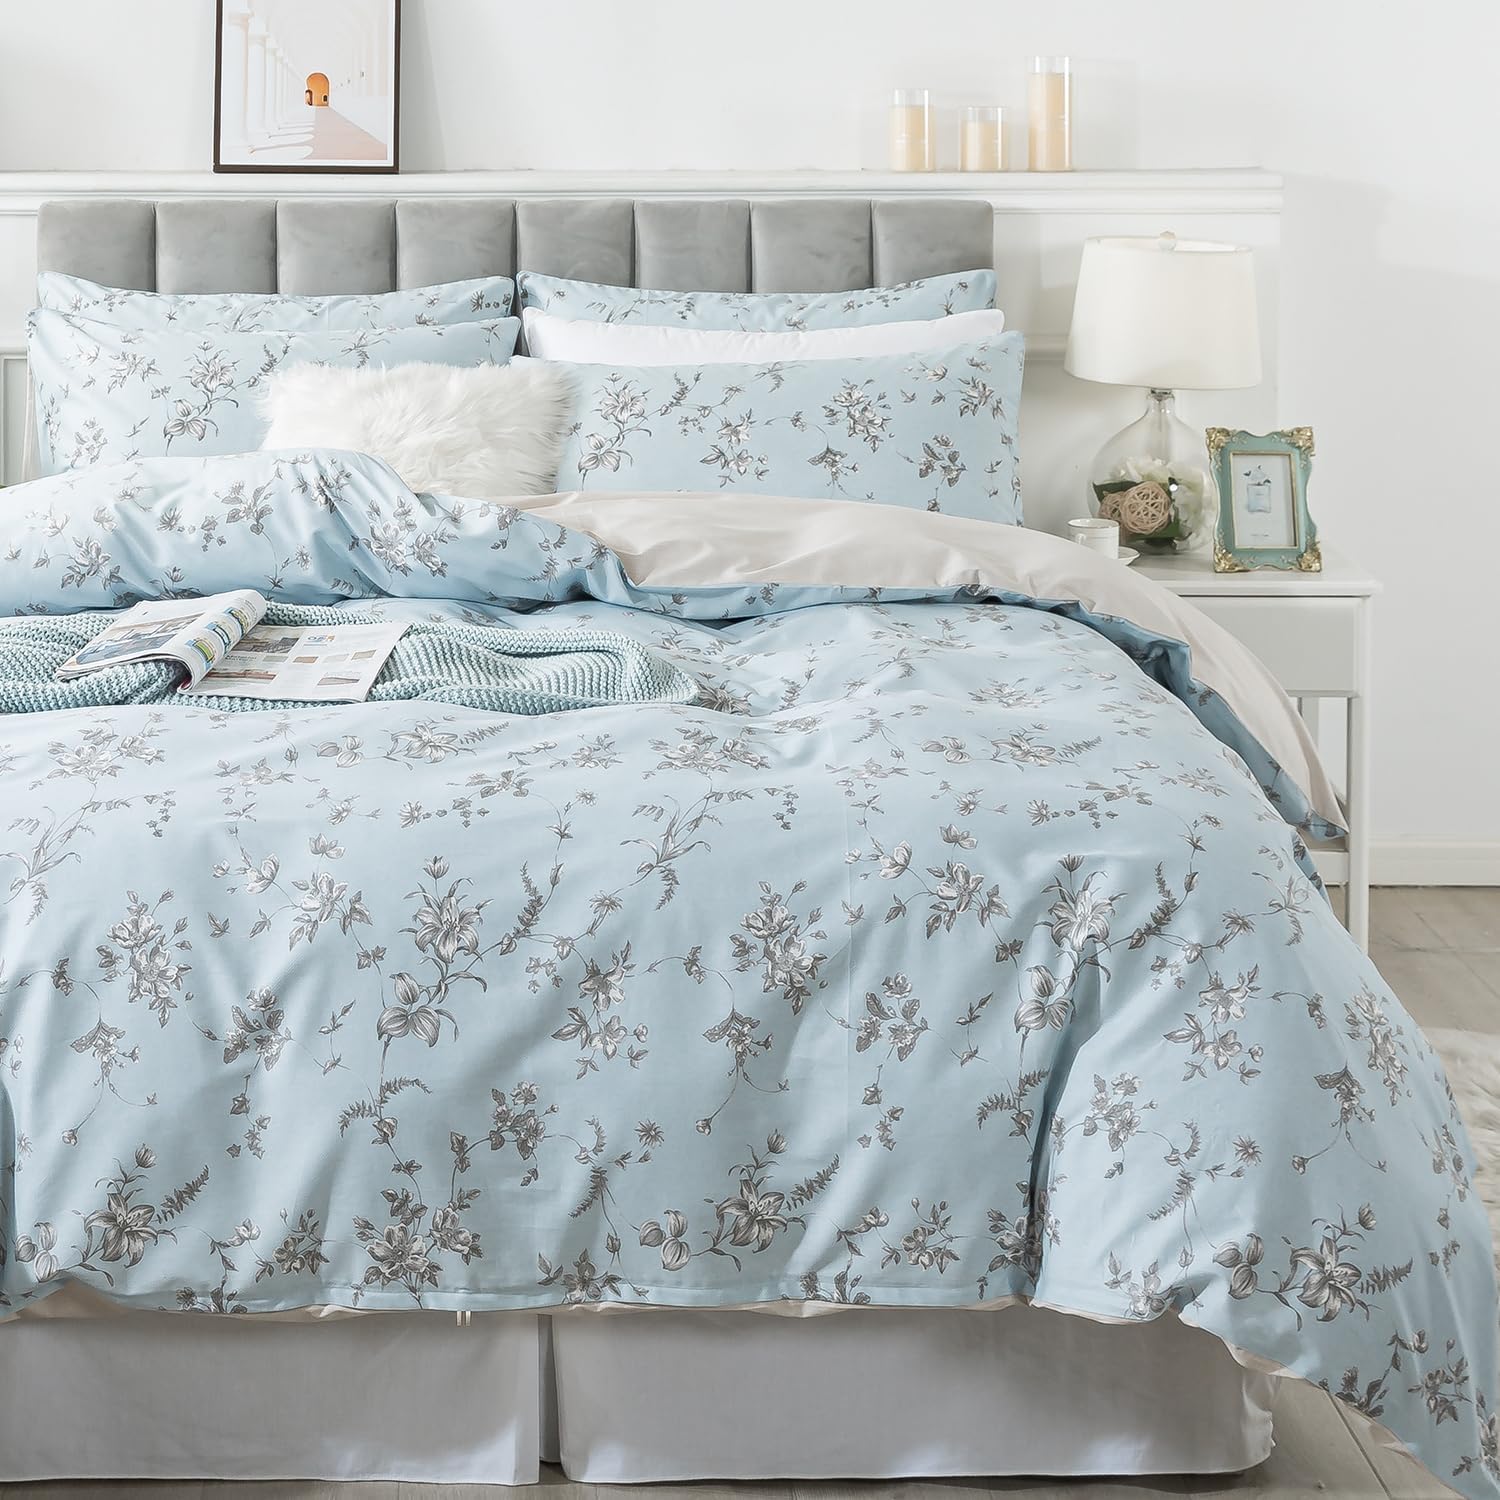 FADFAY Floral Duvet Cover Sets Queen 100% Cotton Blue & Grey Vintage Flower Patterned Comforter Cover French Country Bedding for All Season Soft Crisp Reversible Bed Cover with Zipper 3Pcs, Queen